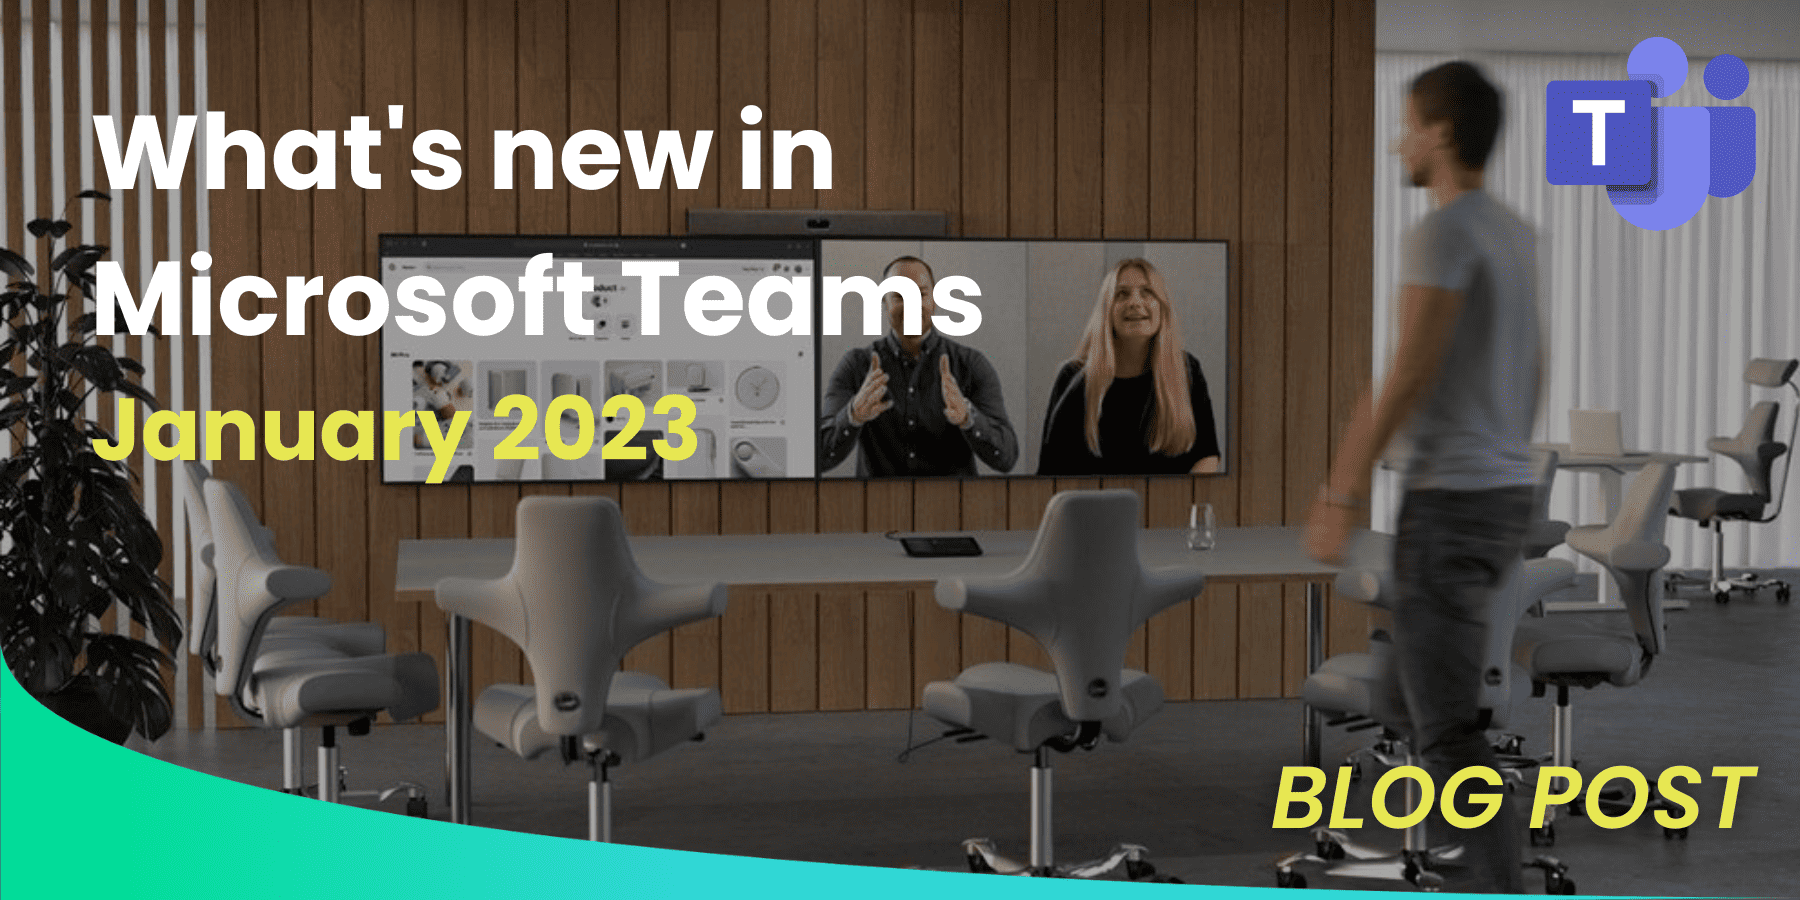 What's new in Microsoft Teams - January 2023